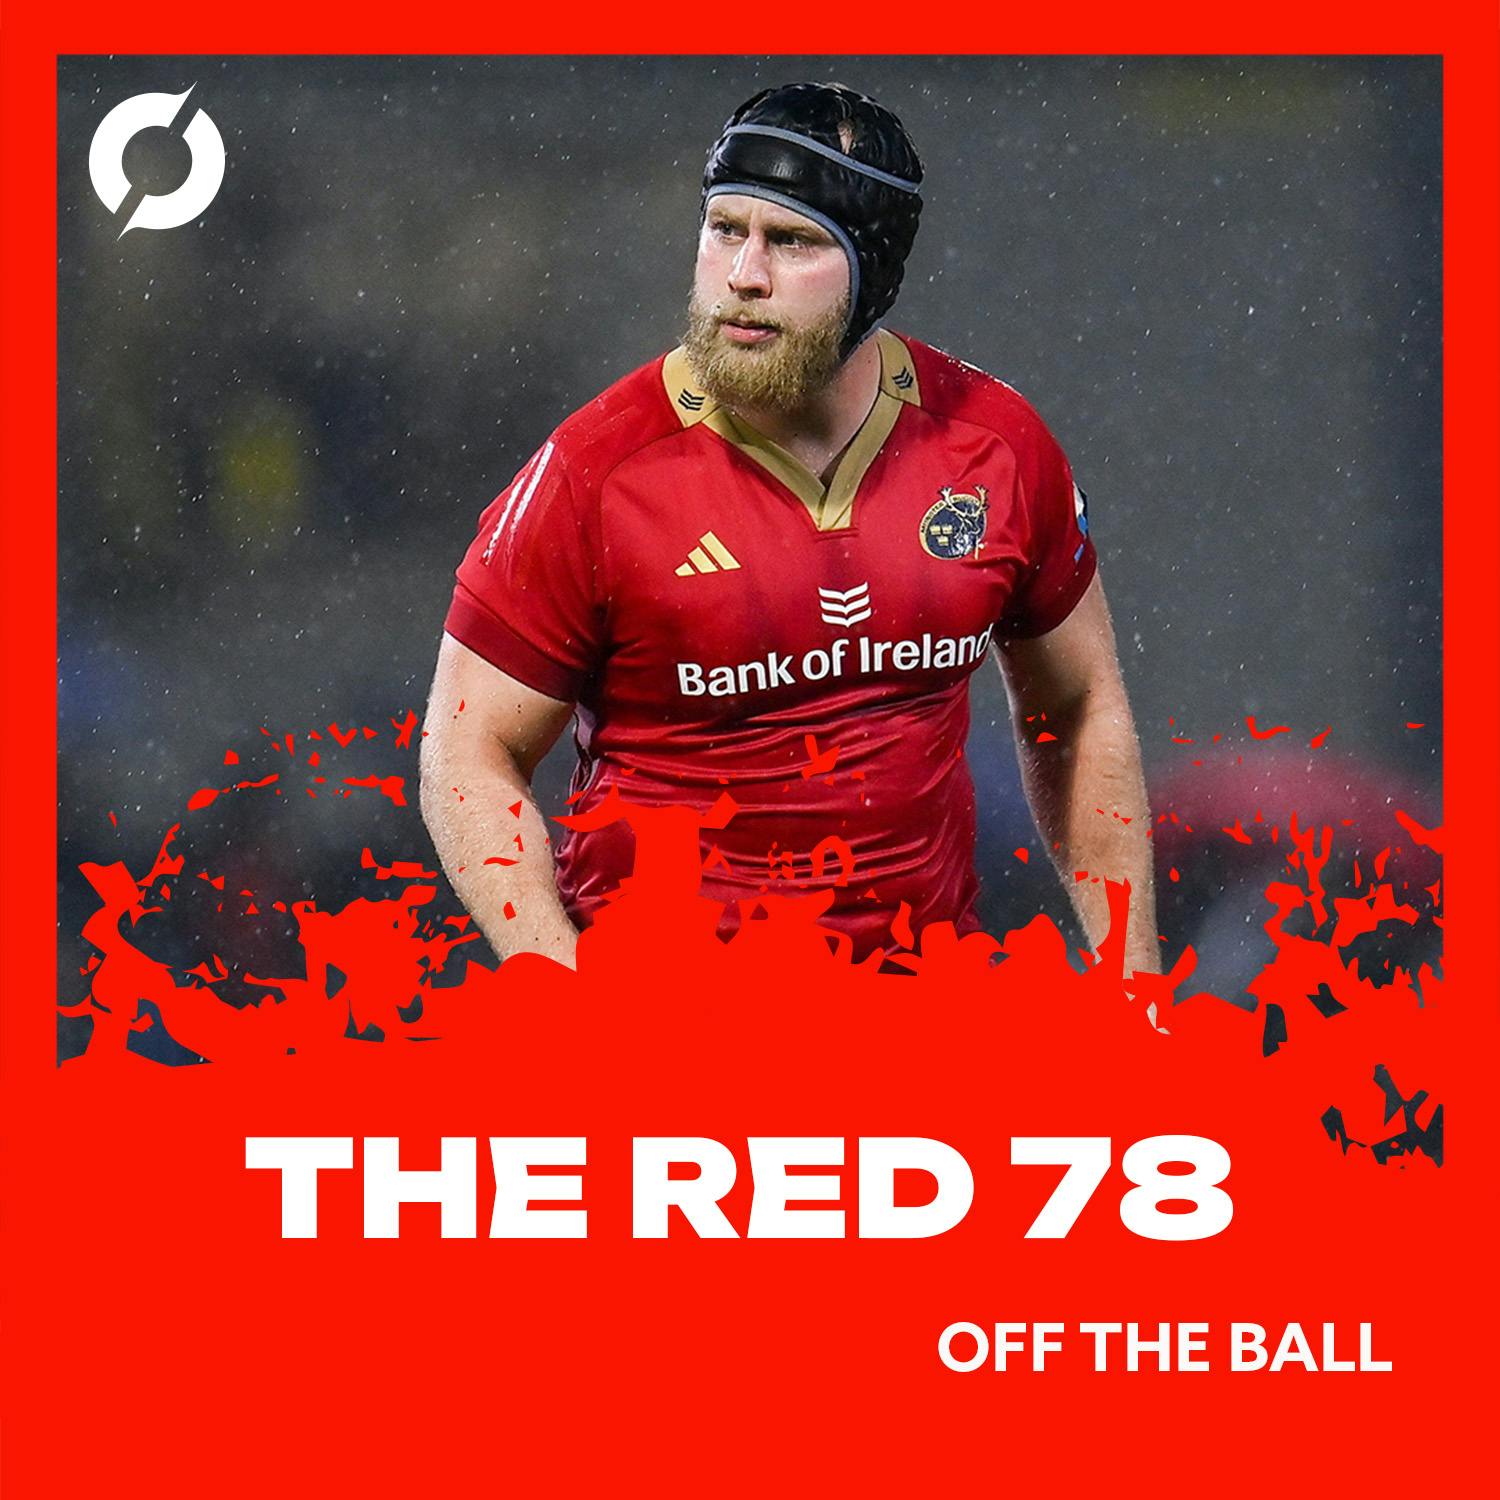 The Red 78 Unlocked: Defeat to Connacht, more injuries, and a much needed week off - Ep.83